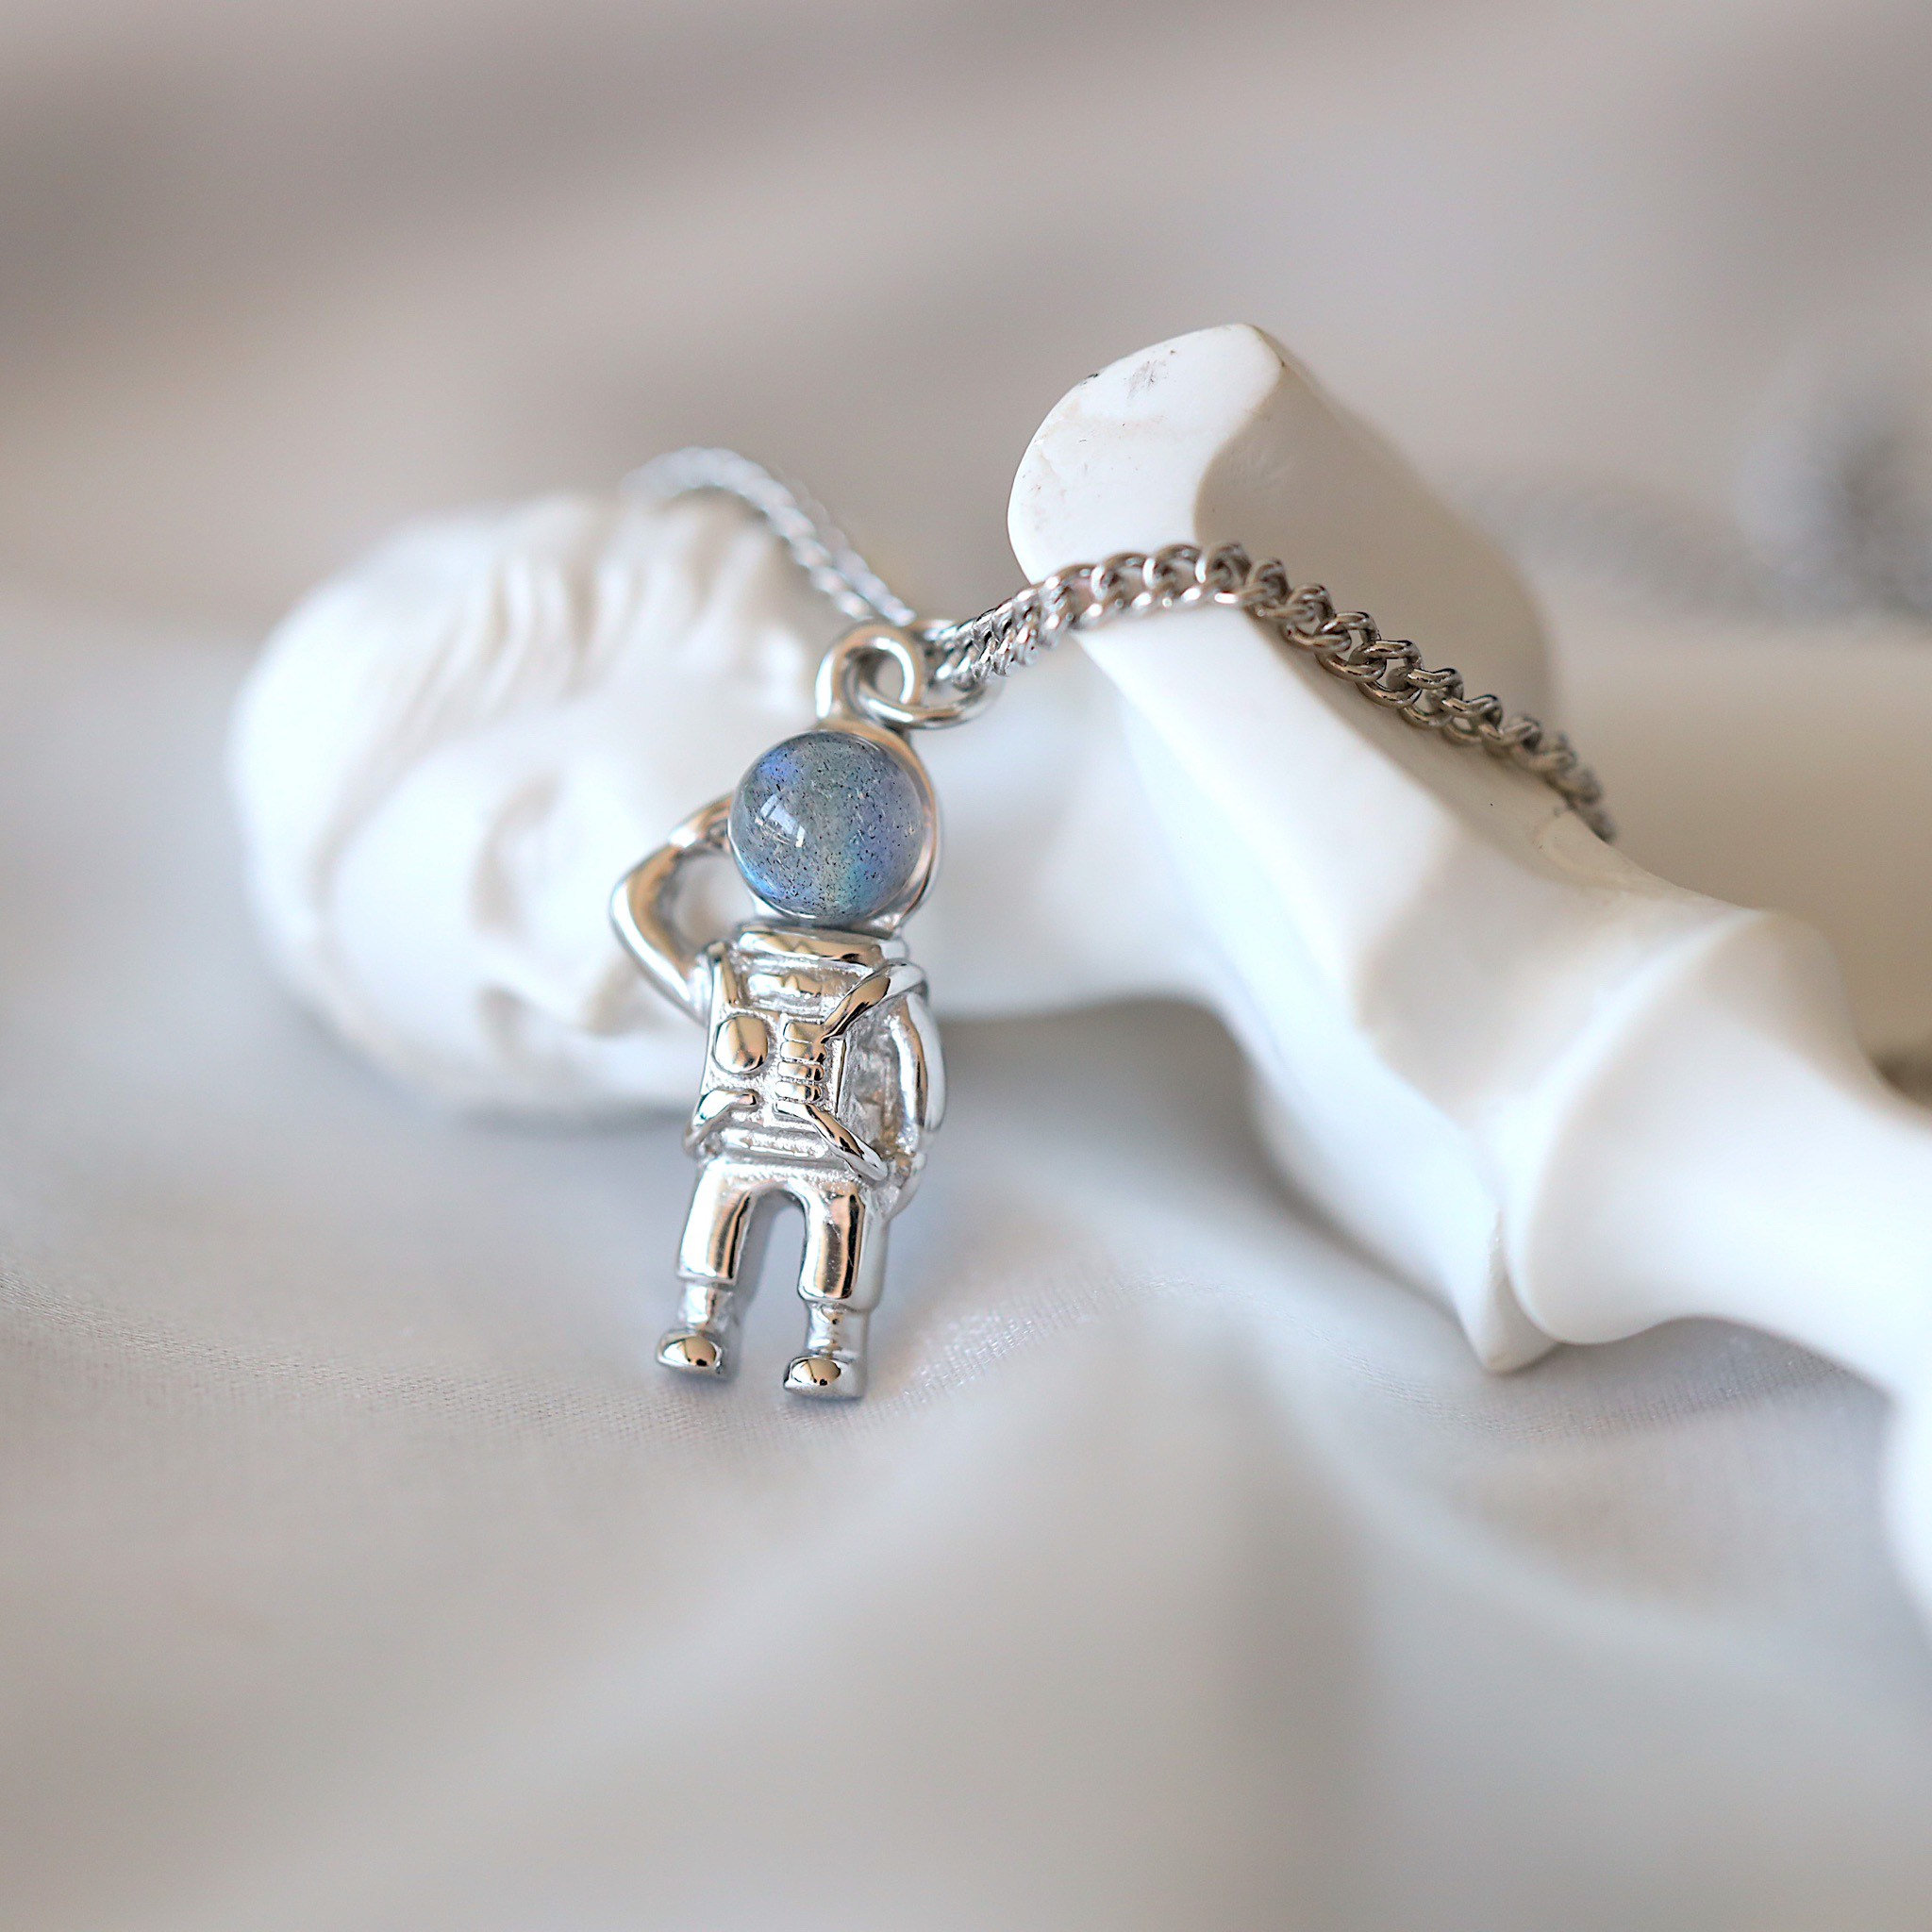 Silver Astronaut Necklace, Jewelry Gifts for Women – GizModern